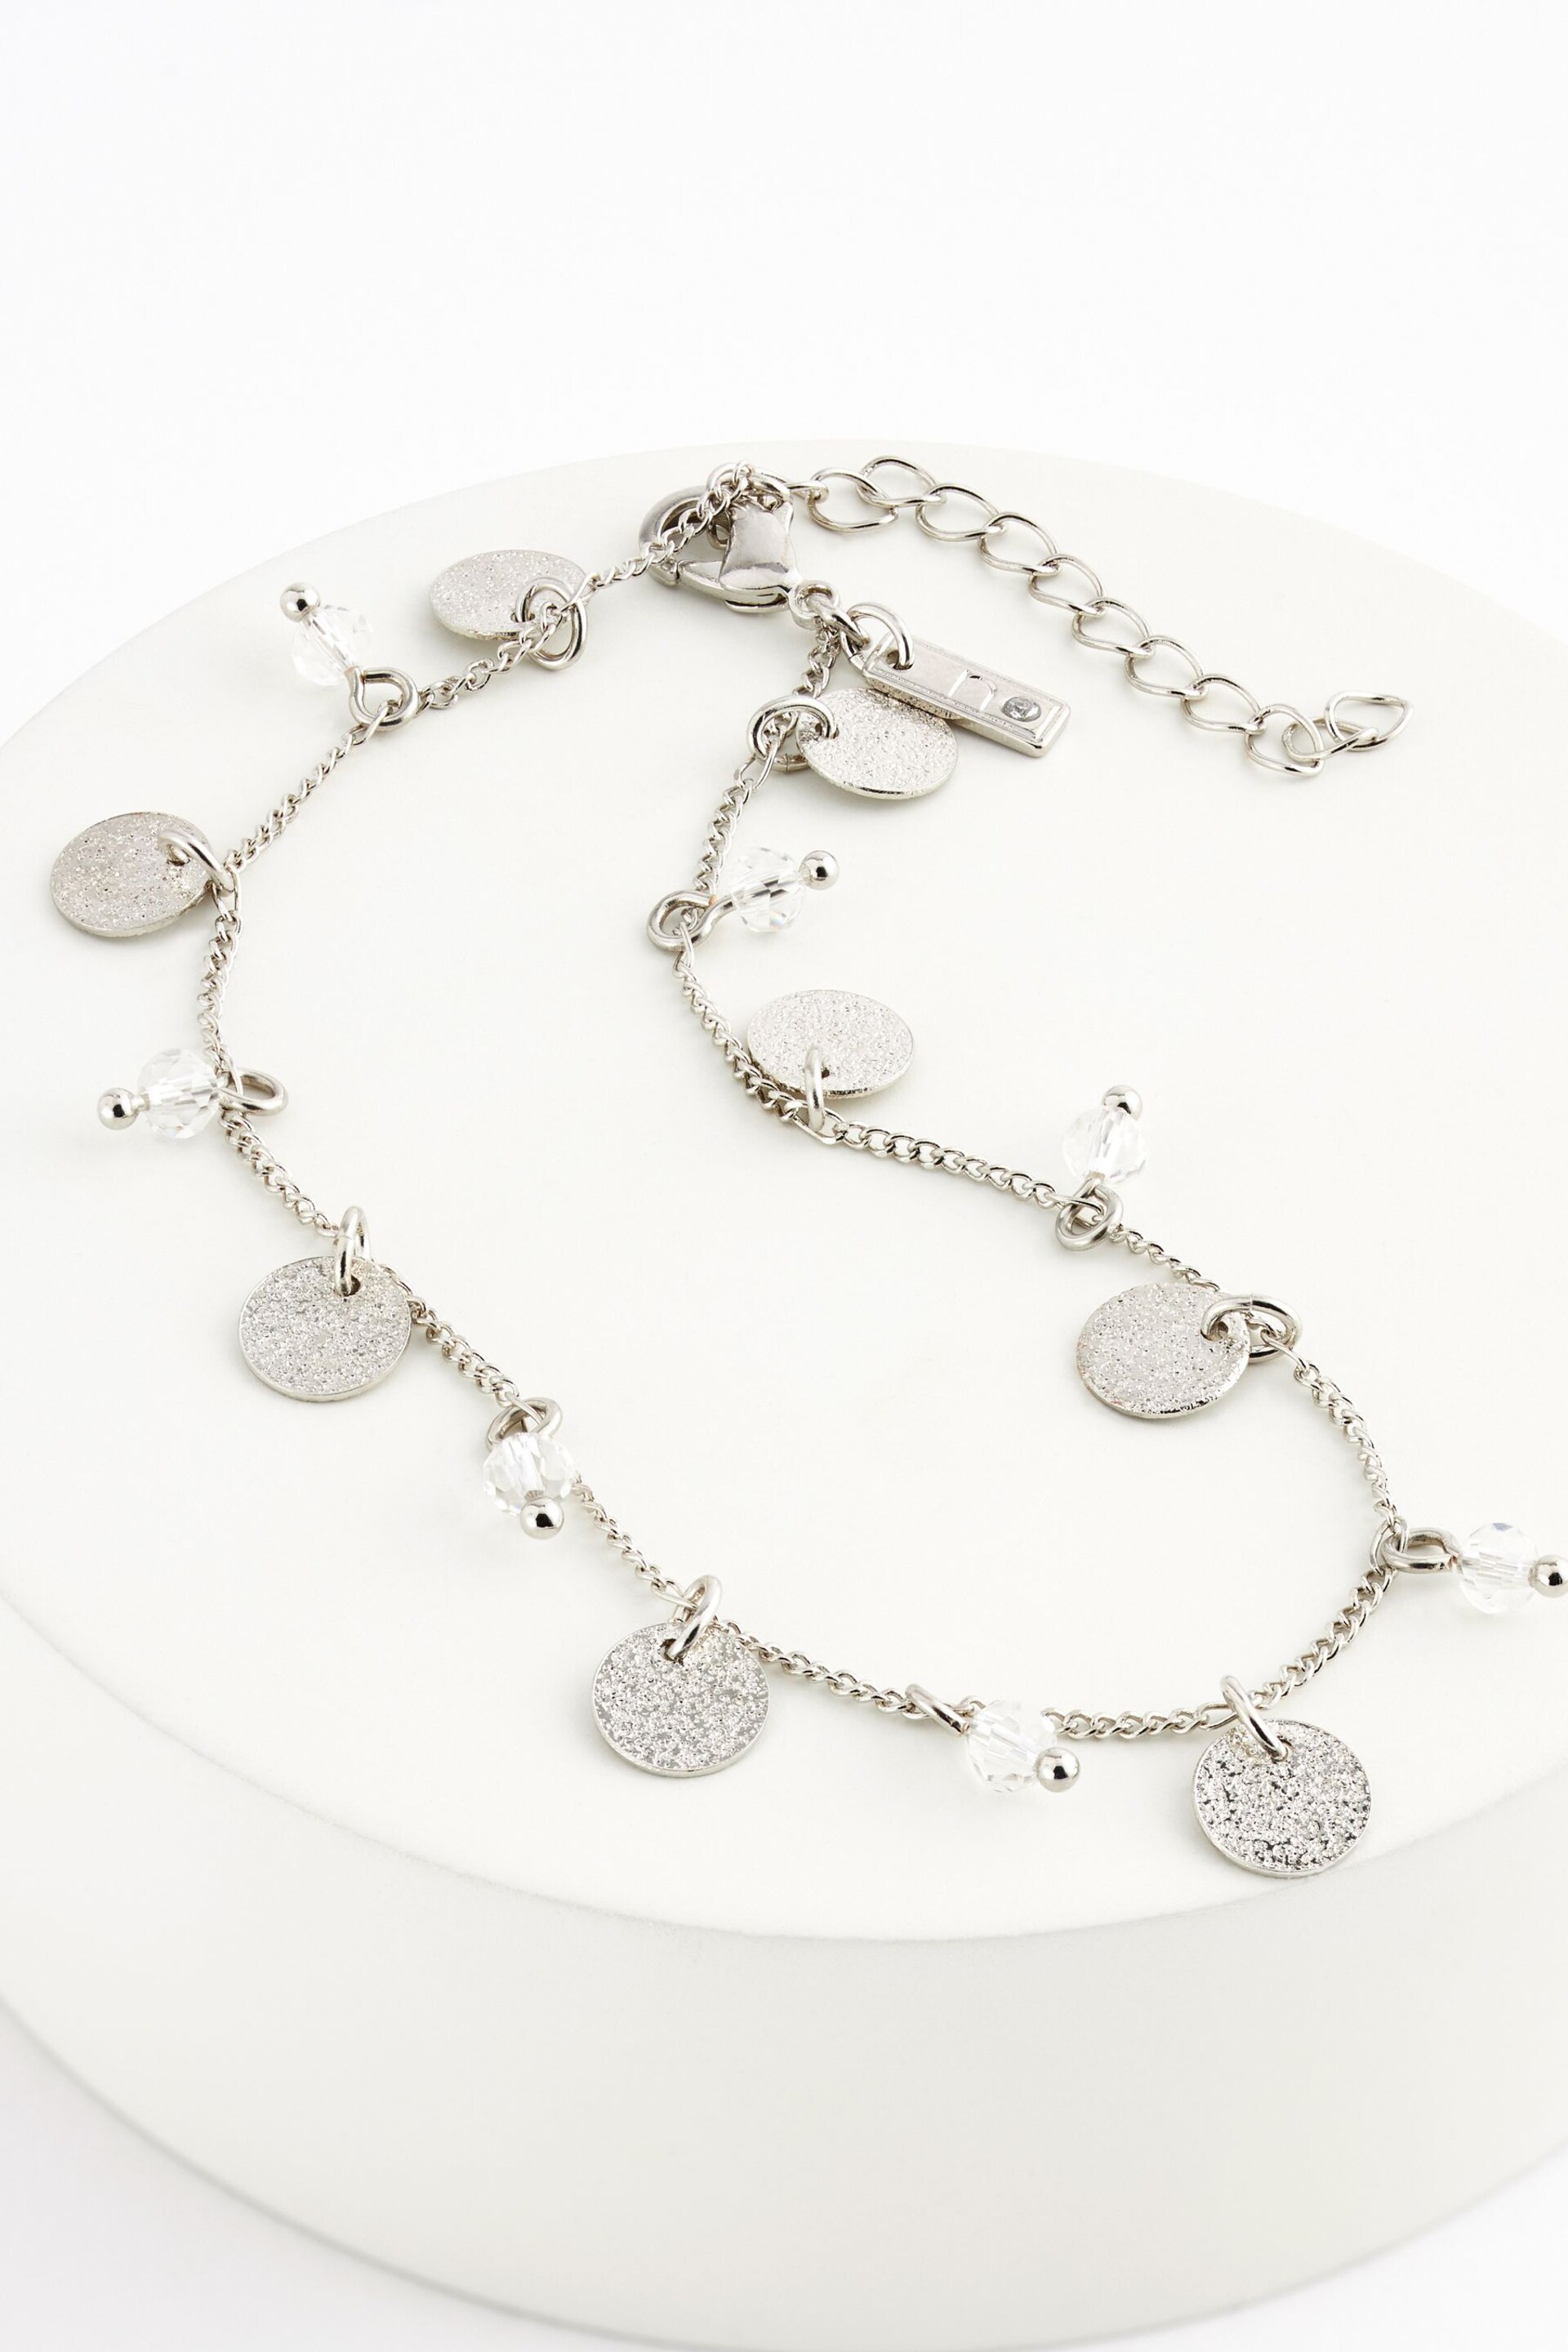 Silver Tone Disc Anklet - Image 1 of 4